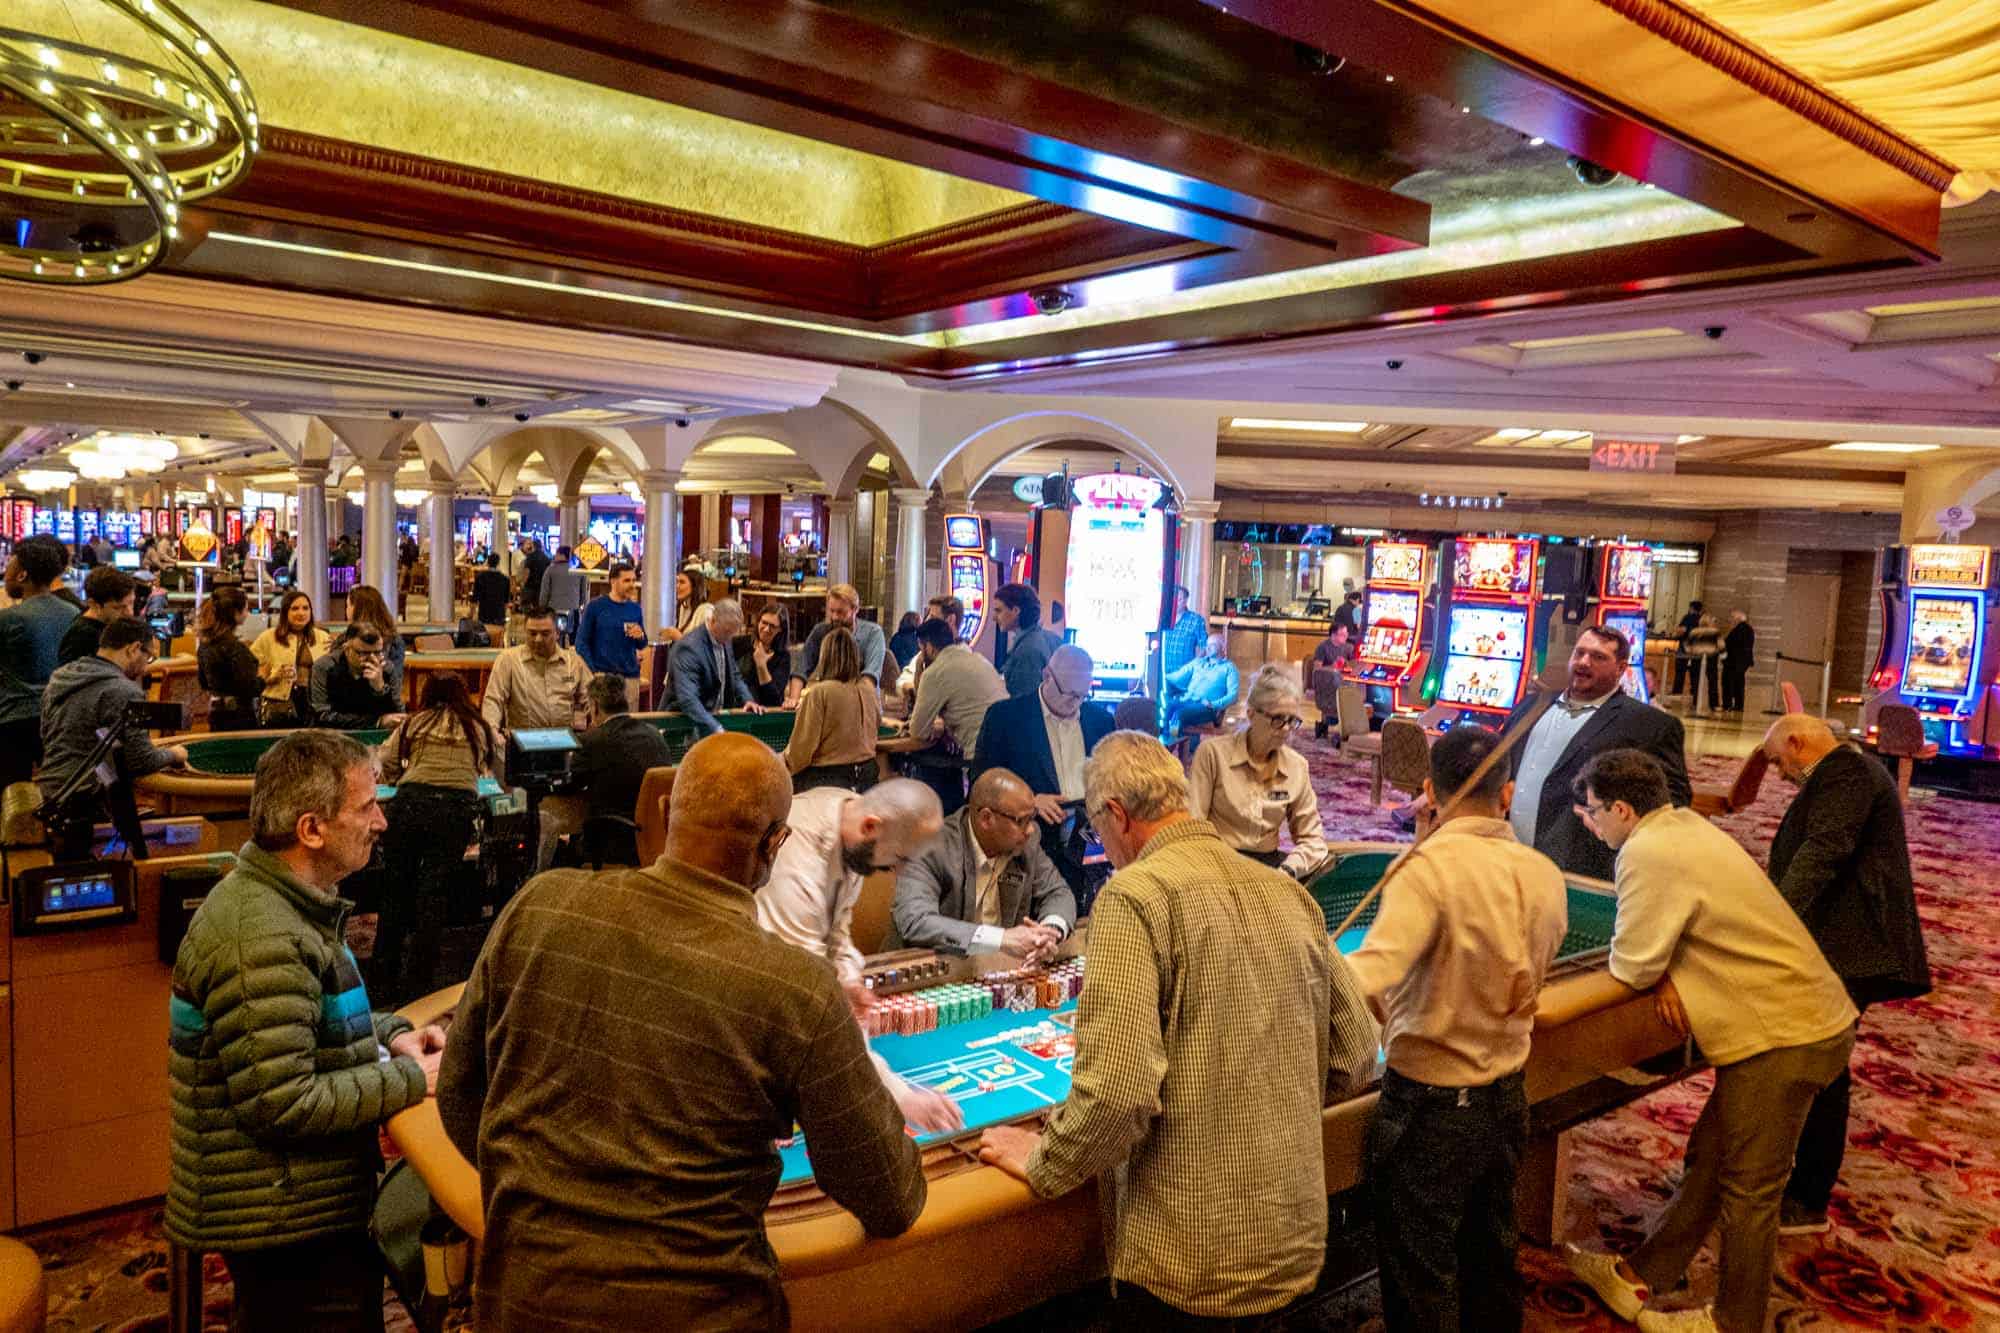 People playing at a craps table in a casino